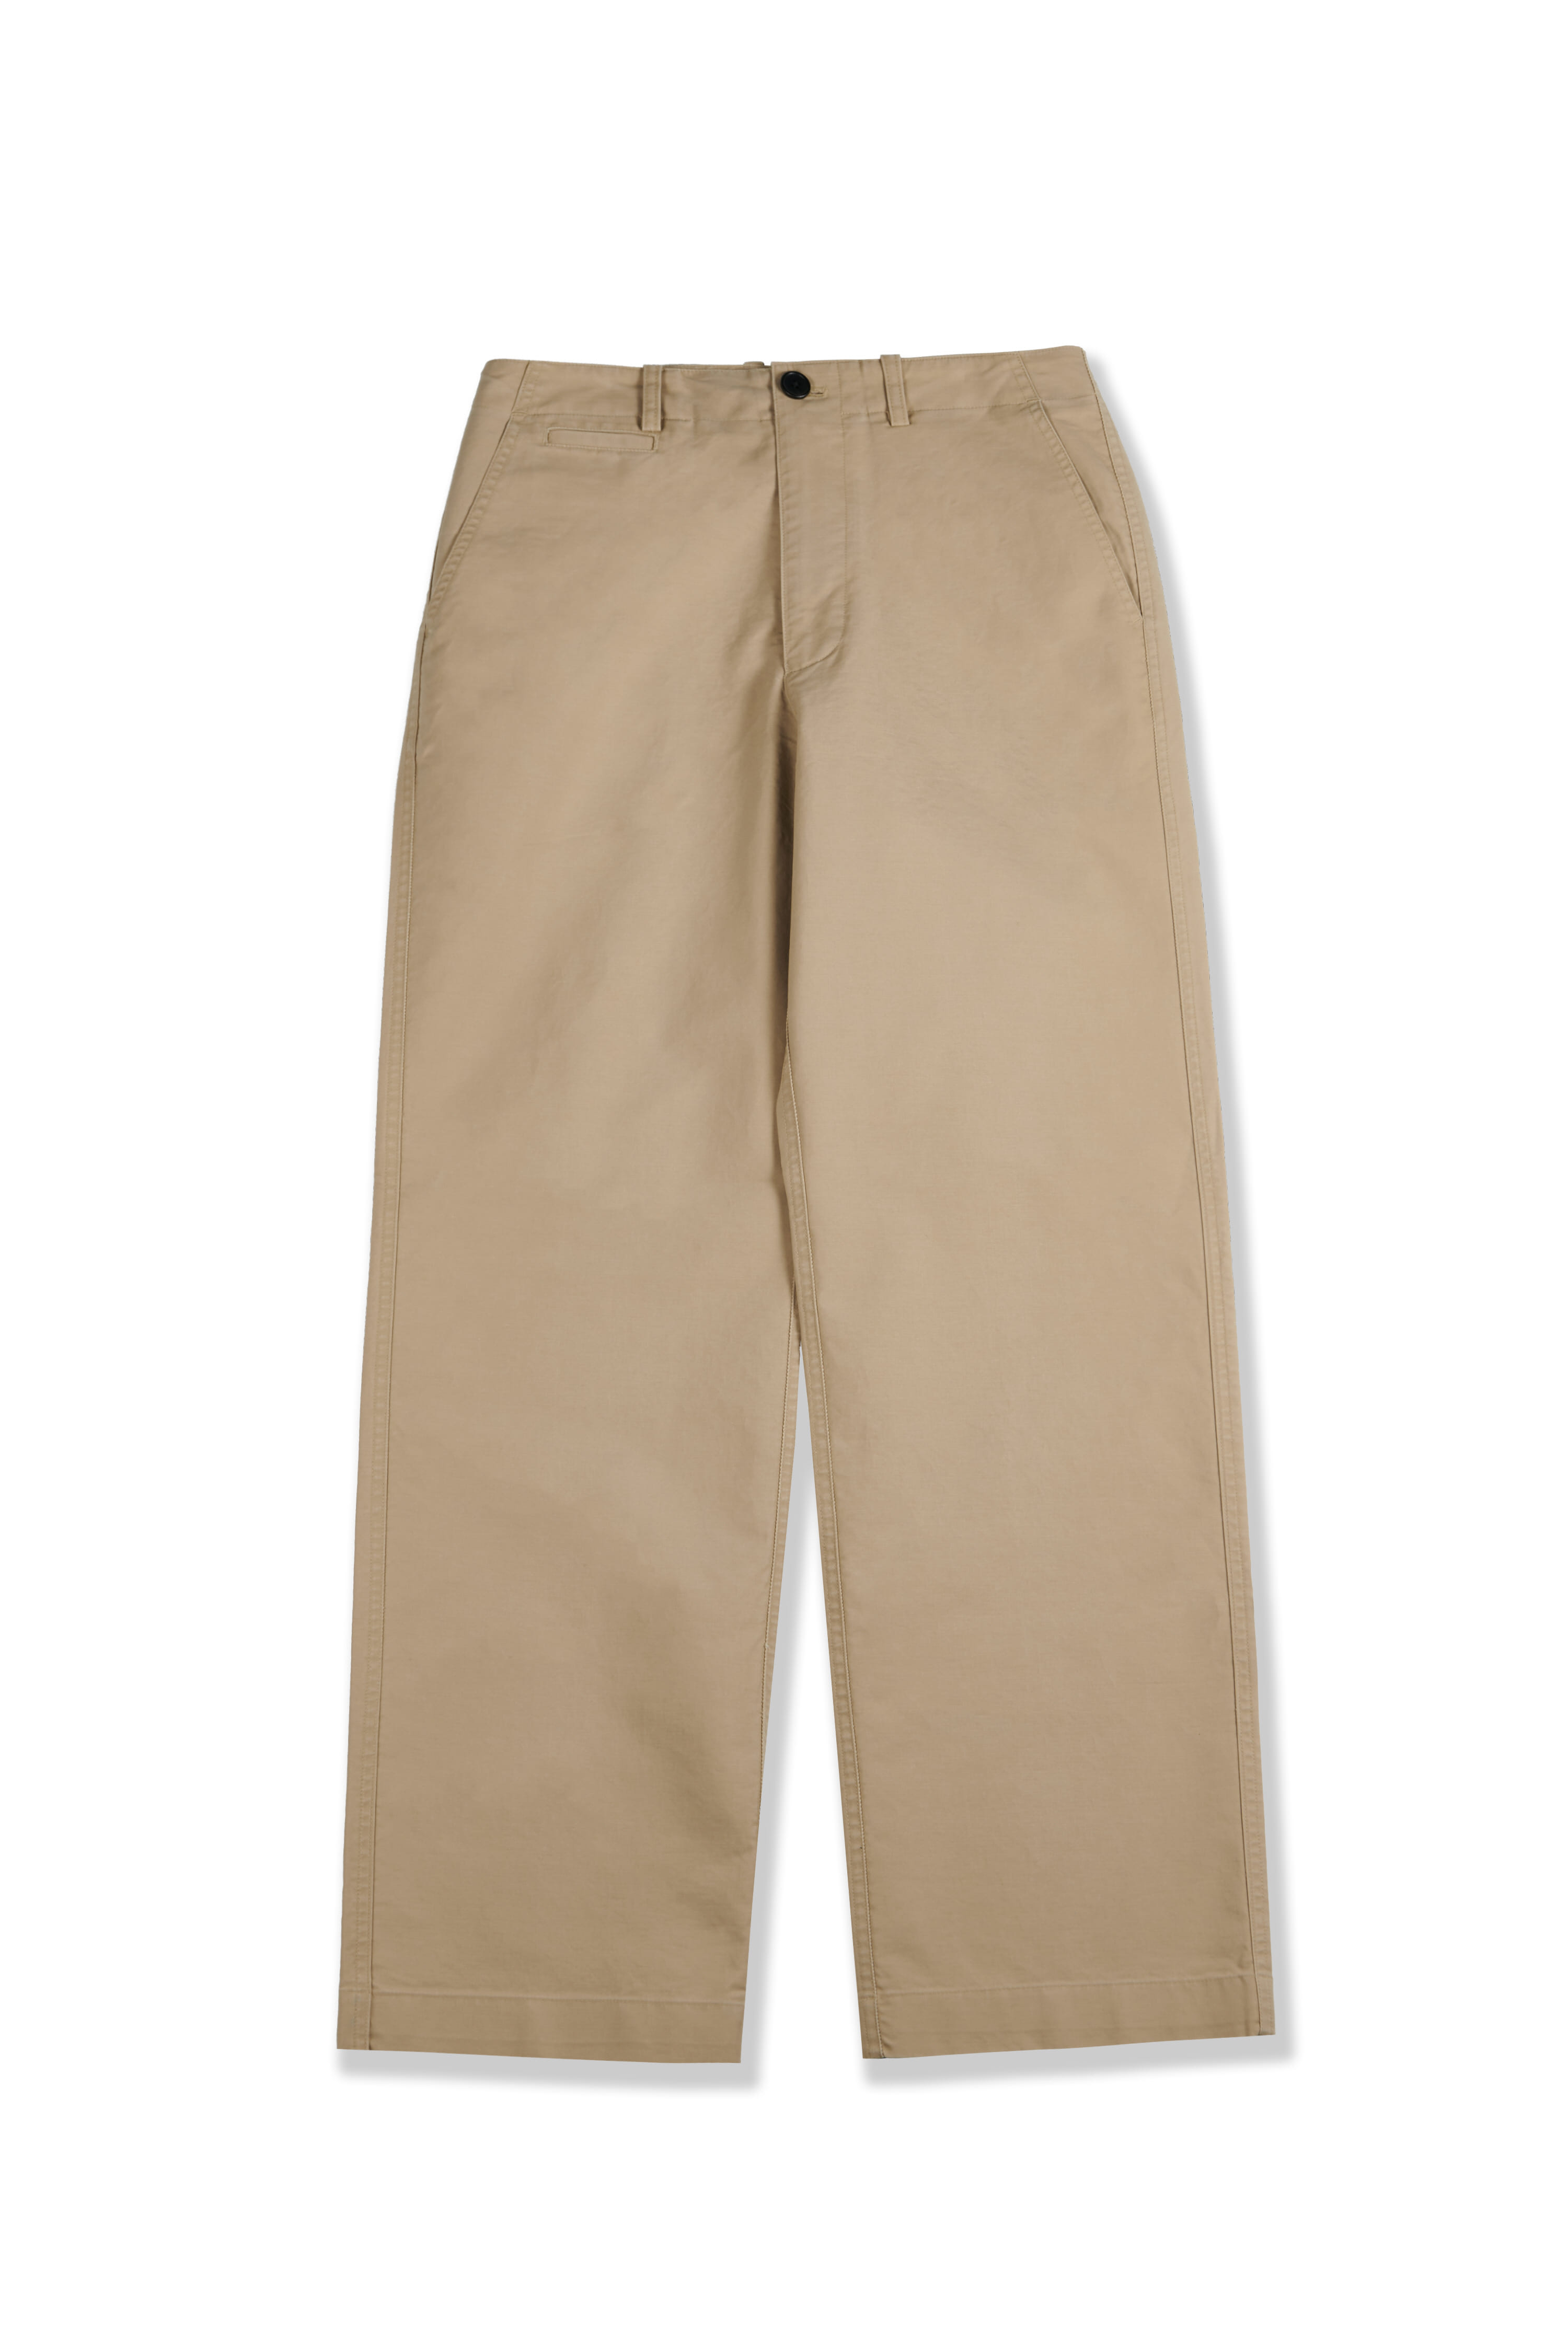 [23&#039;SPRING] chino trousers_beige